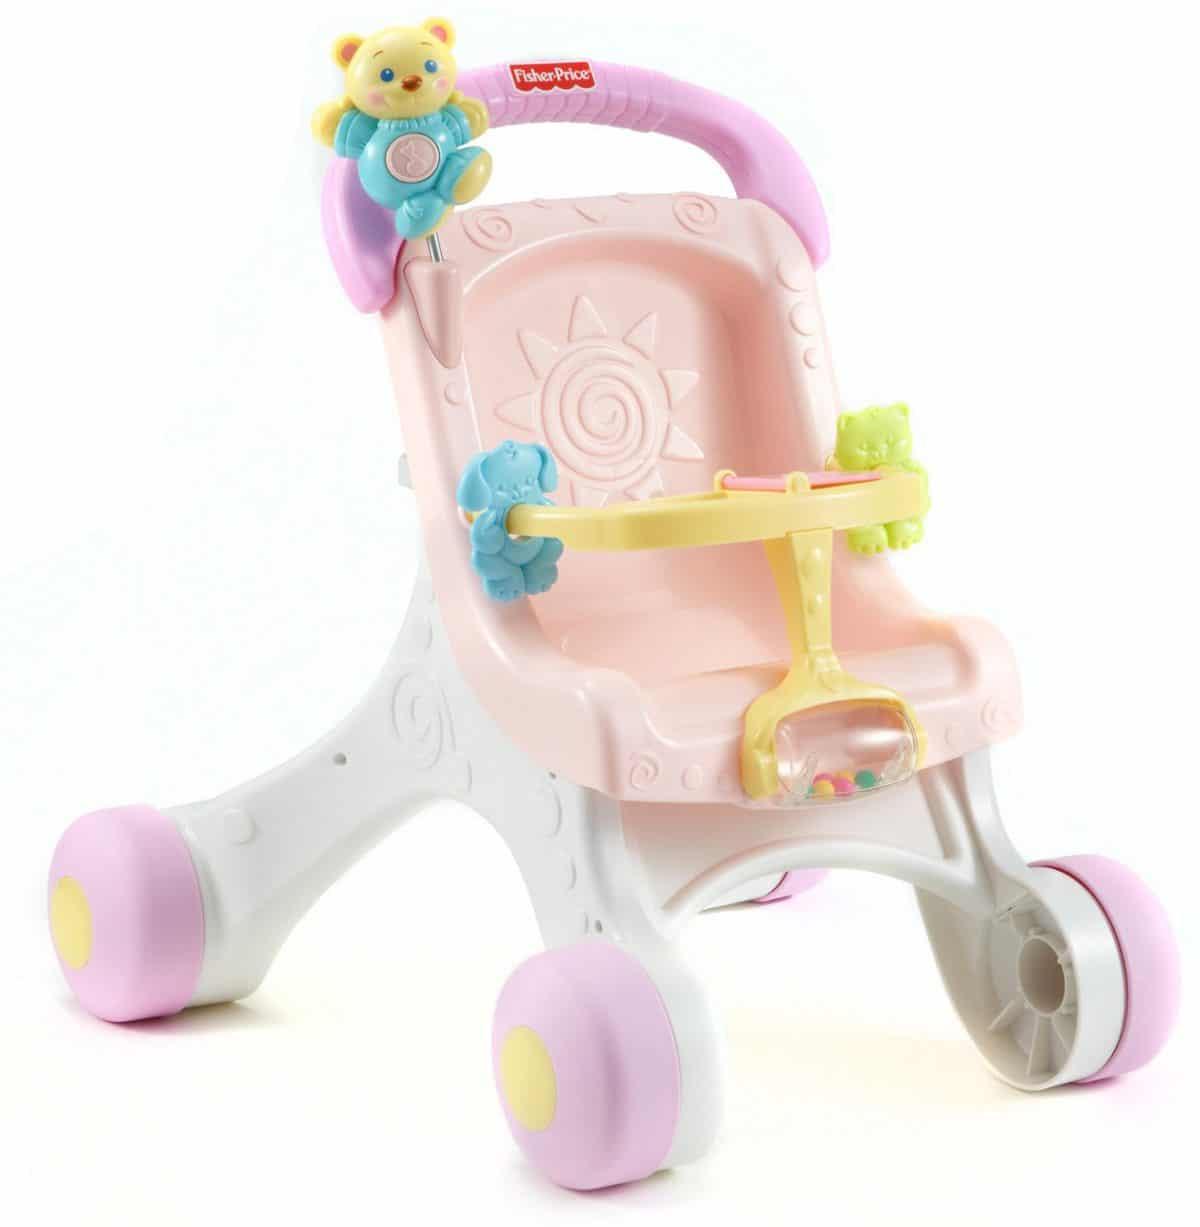 fisher price learn to walk stroller